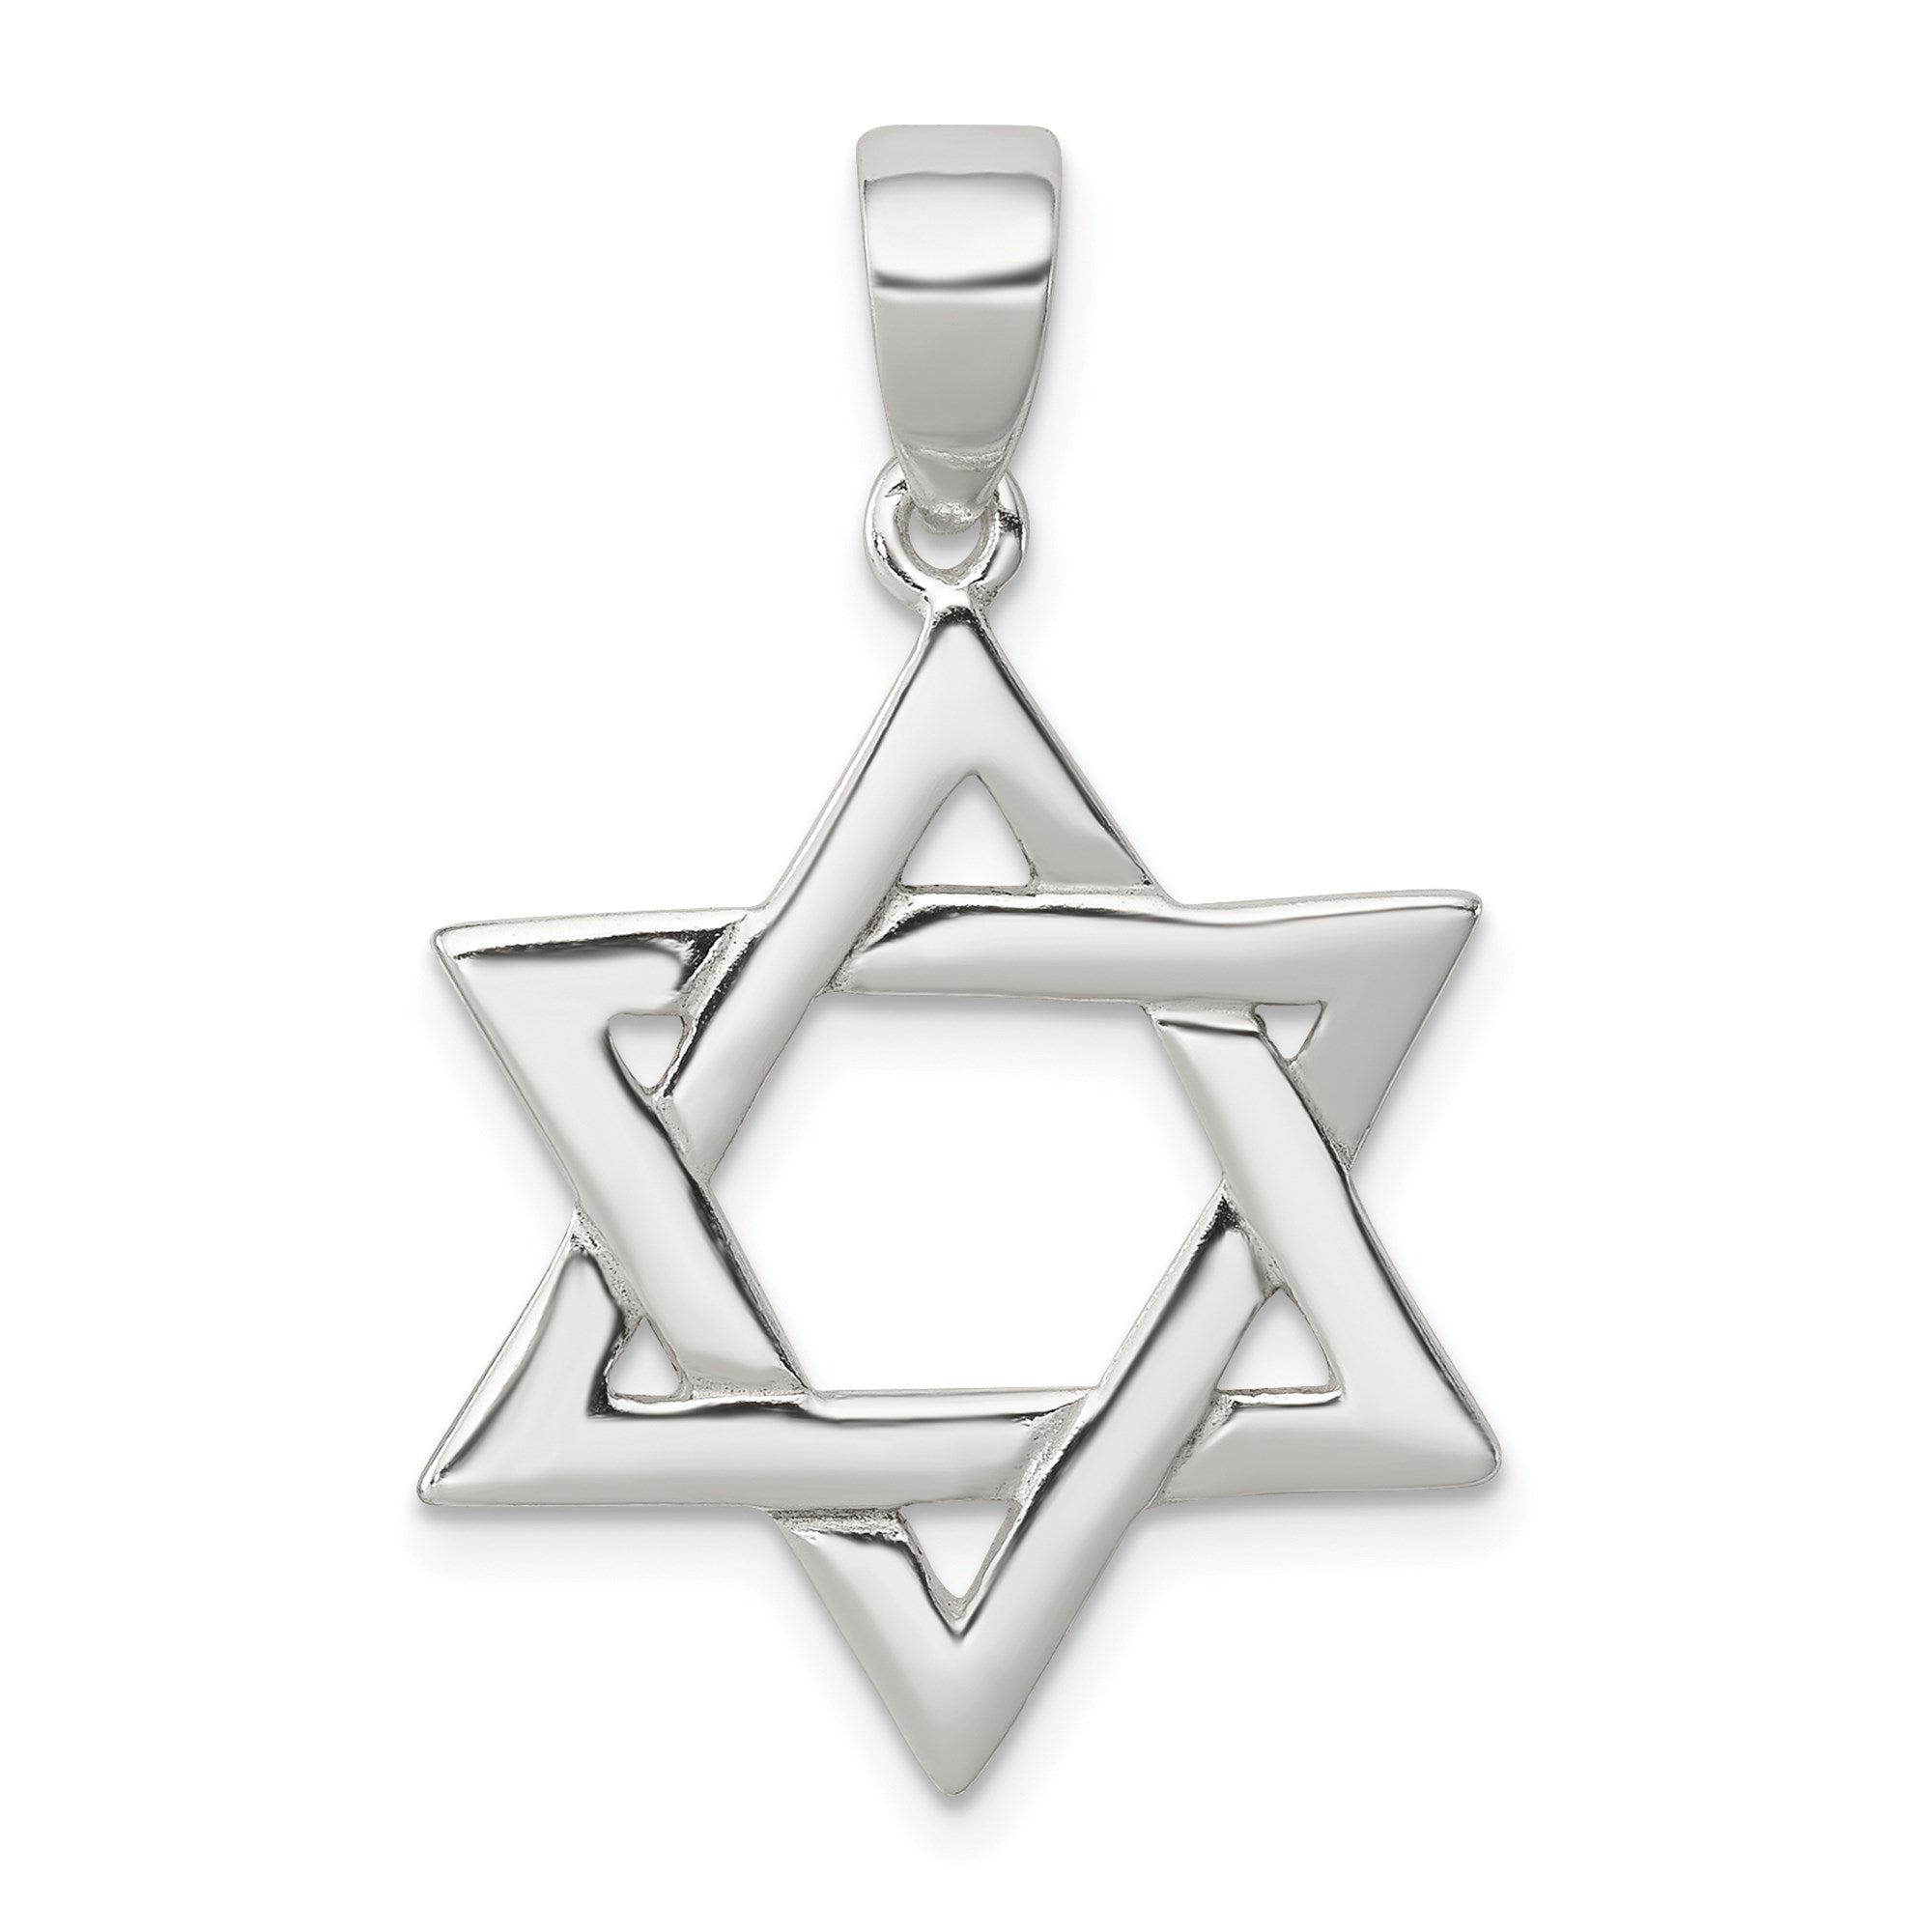 Real Sterling Silver Star of David Pendant Charm